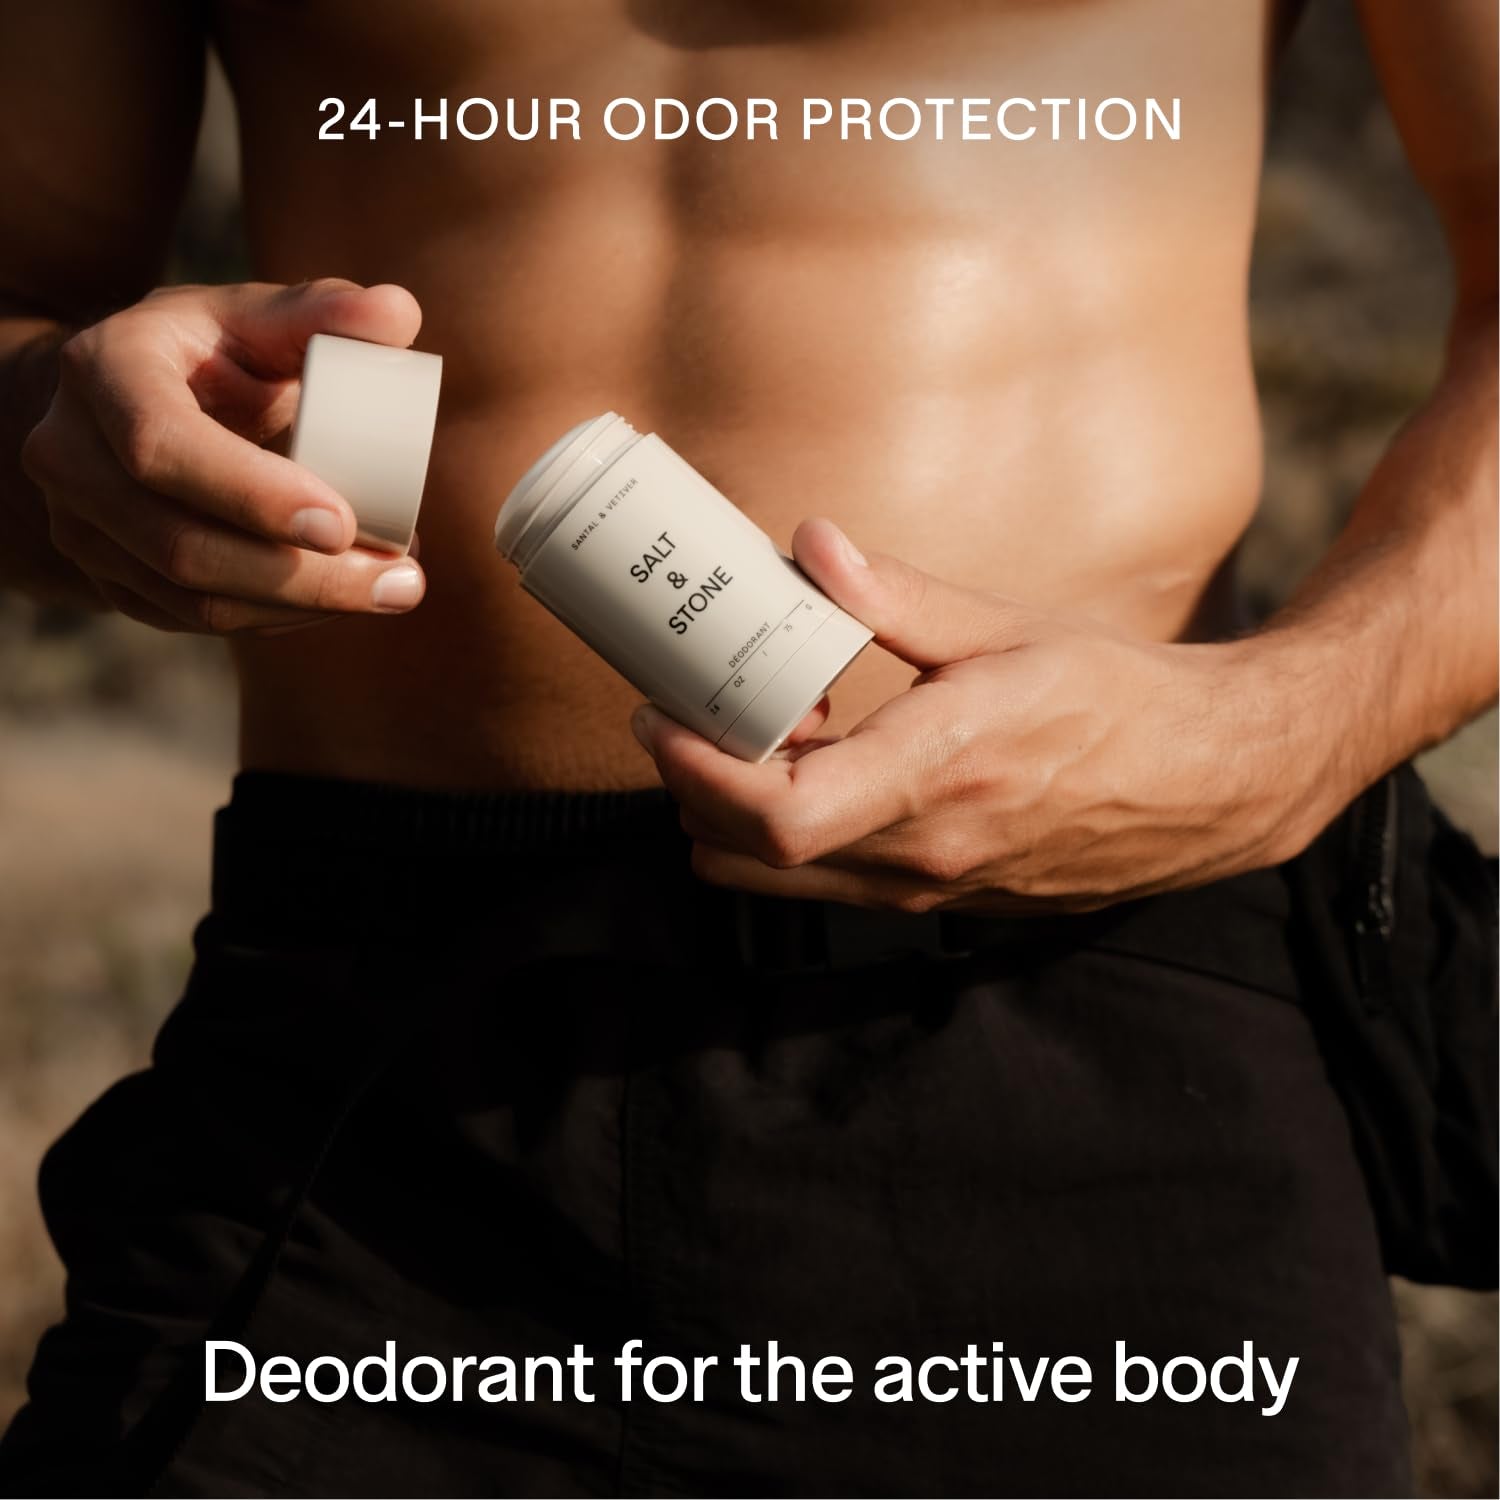 Deodorant | Extra Strength Natural Deodorant for Women & Men | Aluminum Free with Seaweed Extracts, Shea Butter & Probiotics | Free from Parabens, Sulfates & Phthalates (2.6 Oz)